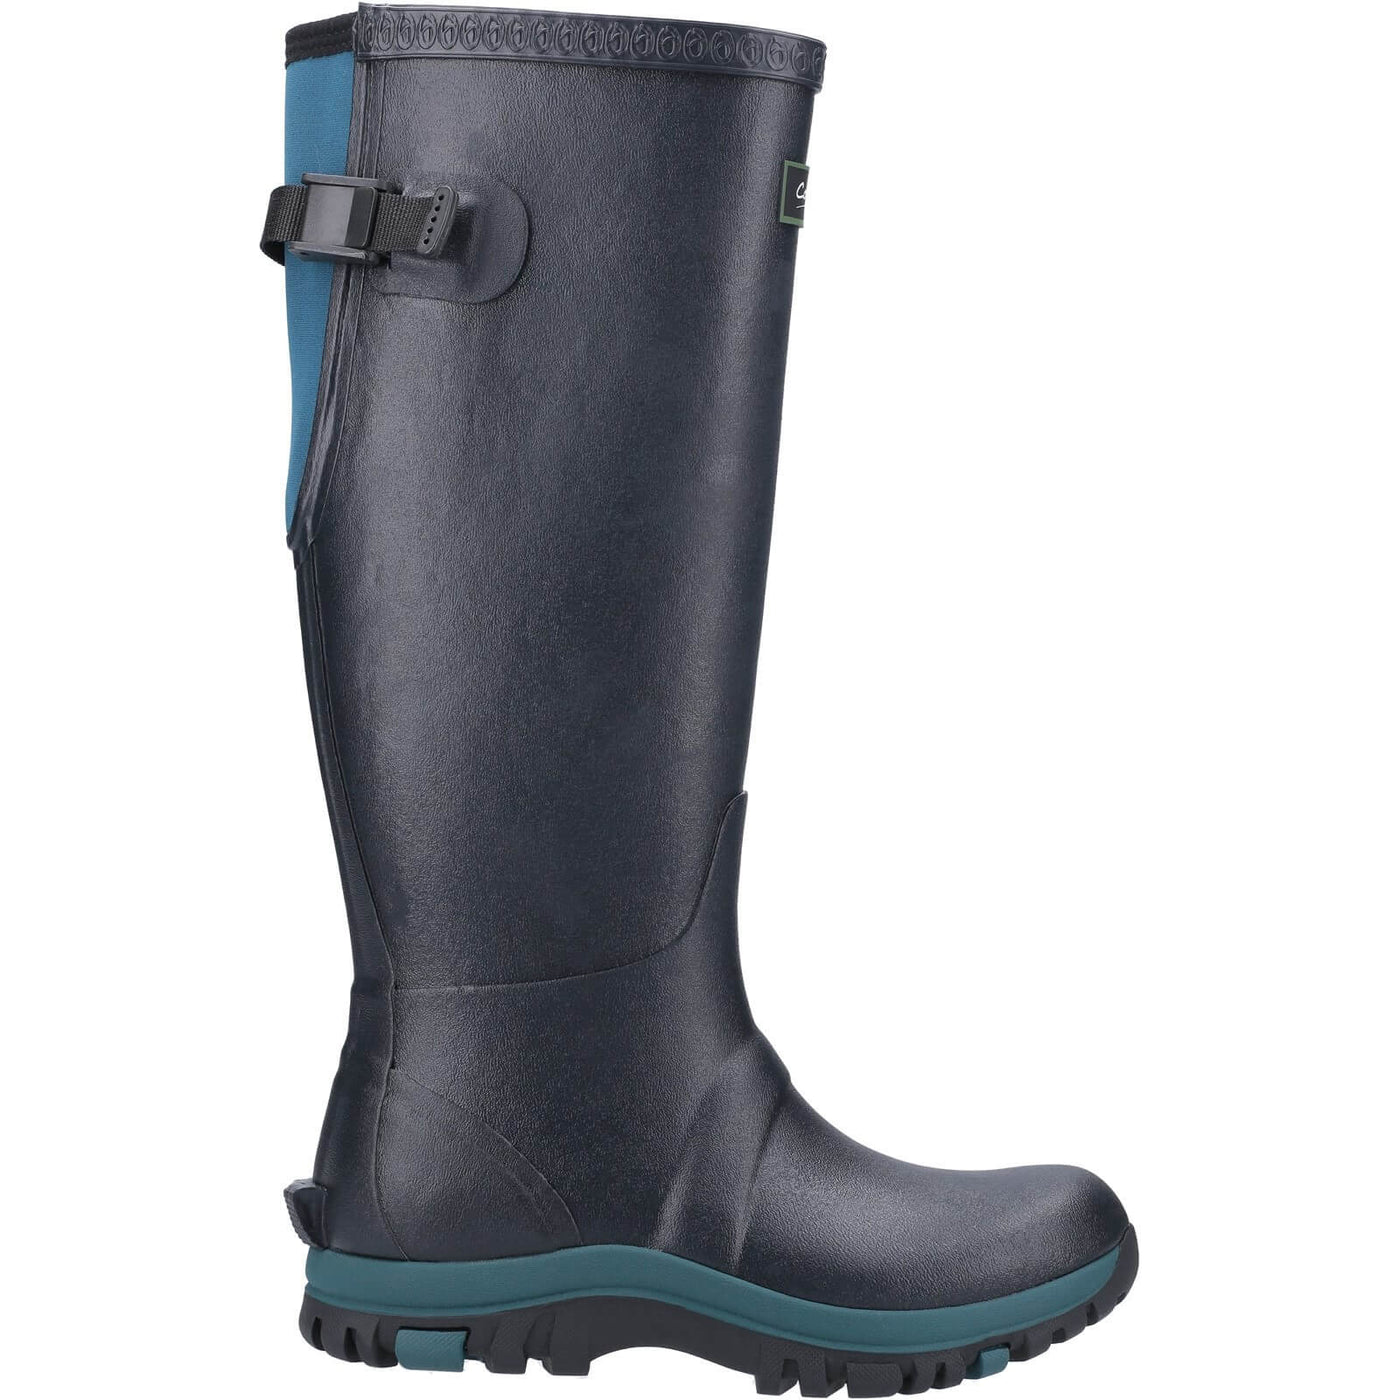 Cotswold Realm Adjustable Wellington Boots Navy/Teal 4#colour_navy-teal